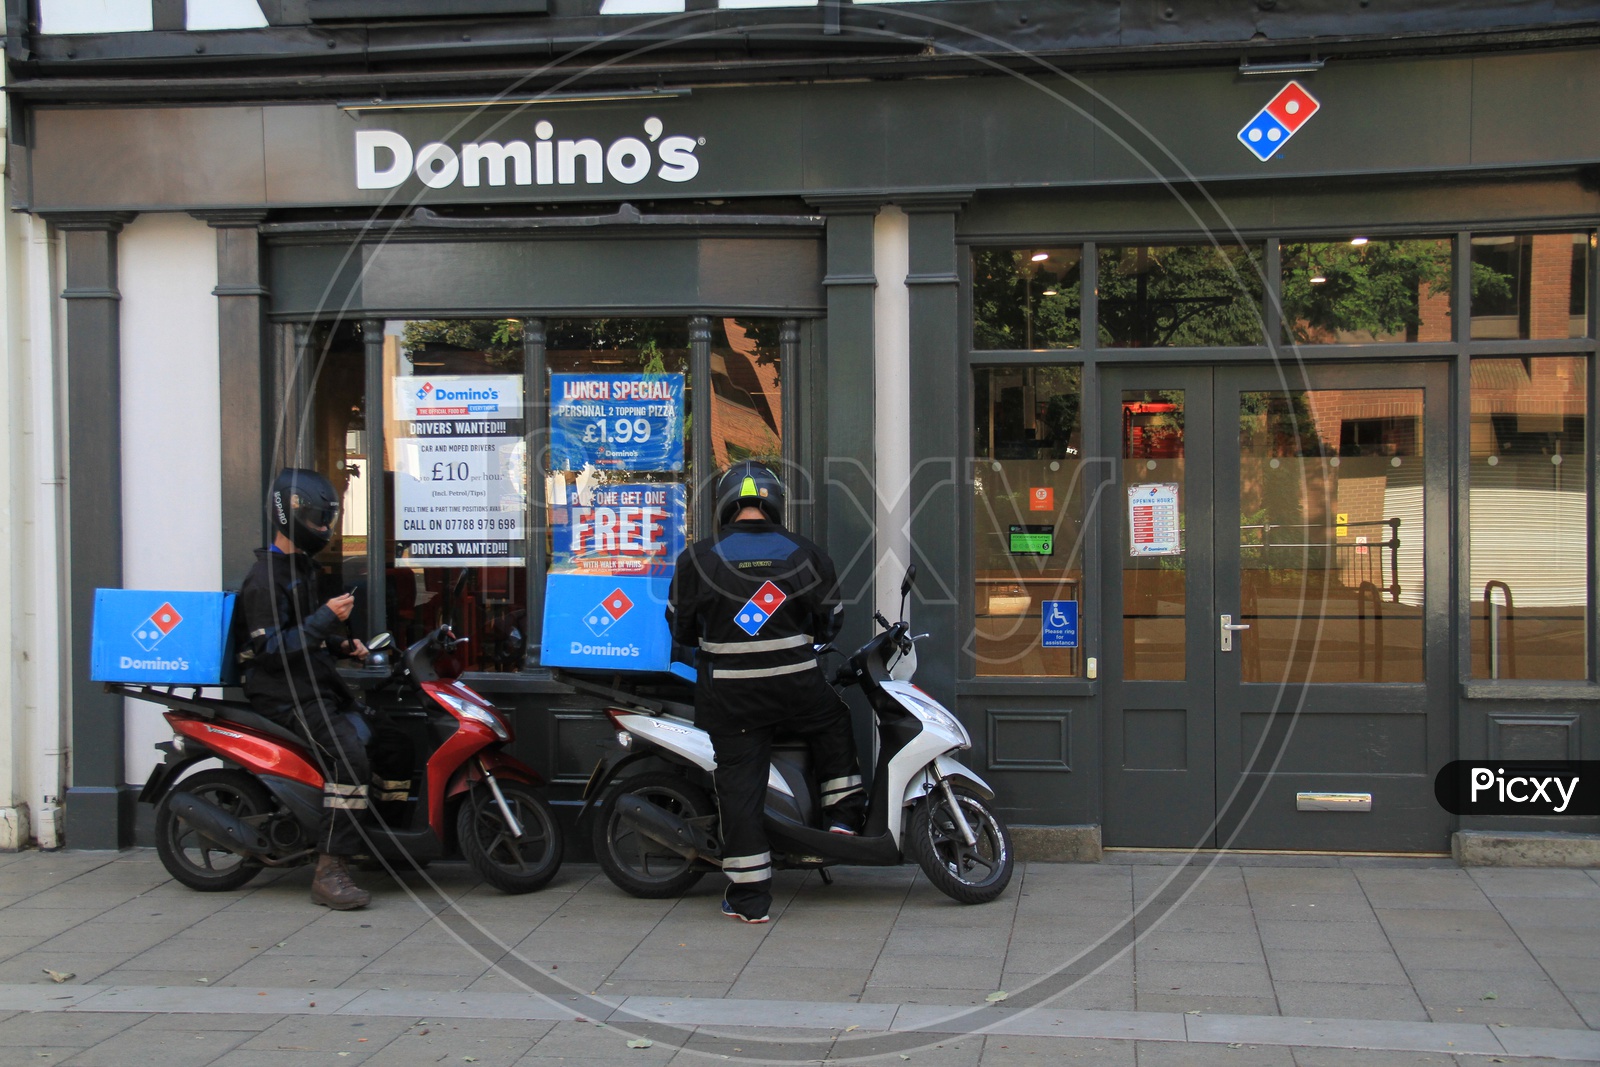 Domino's Delivery Boys with Bikes outside a Outlet